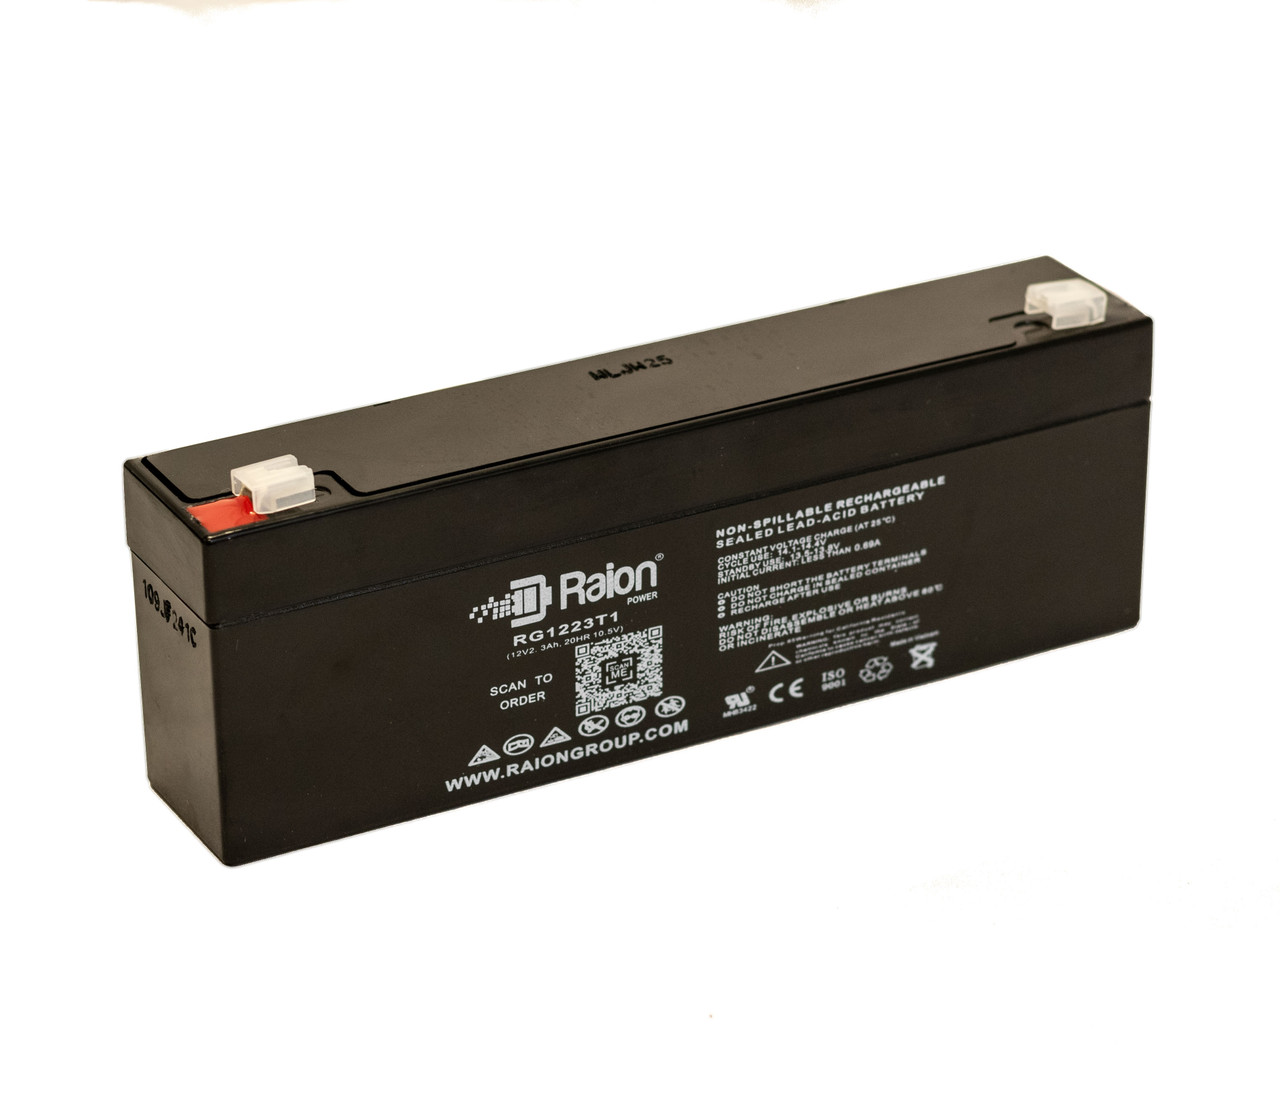 Raion Power RG1223T1 Replacement Battery for GE Medical Systems Vivid 7 Ultrasound